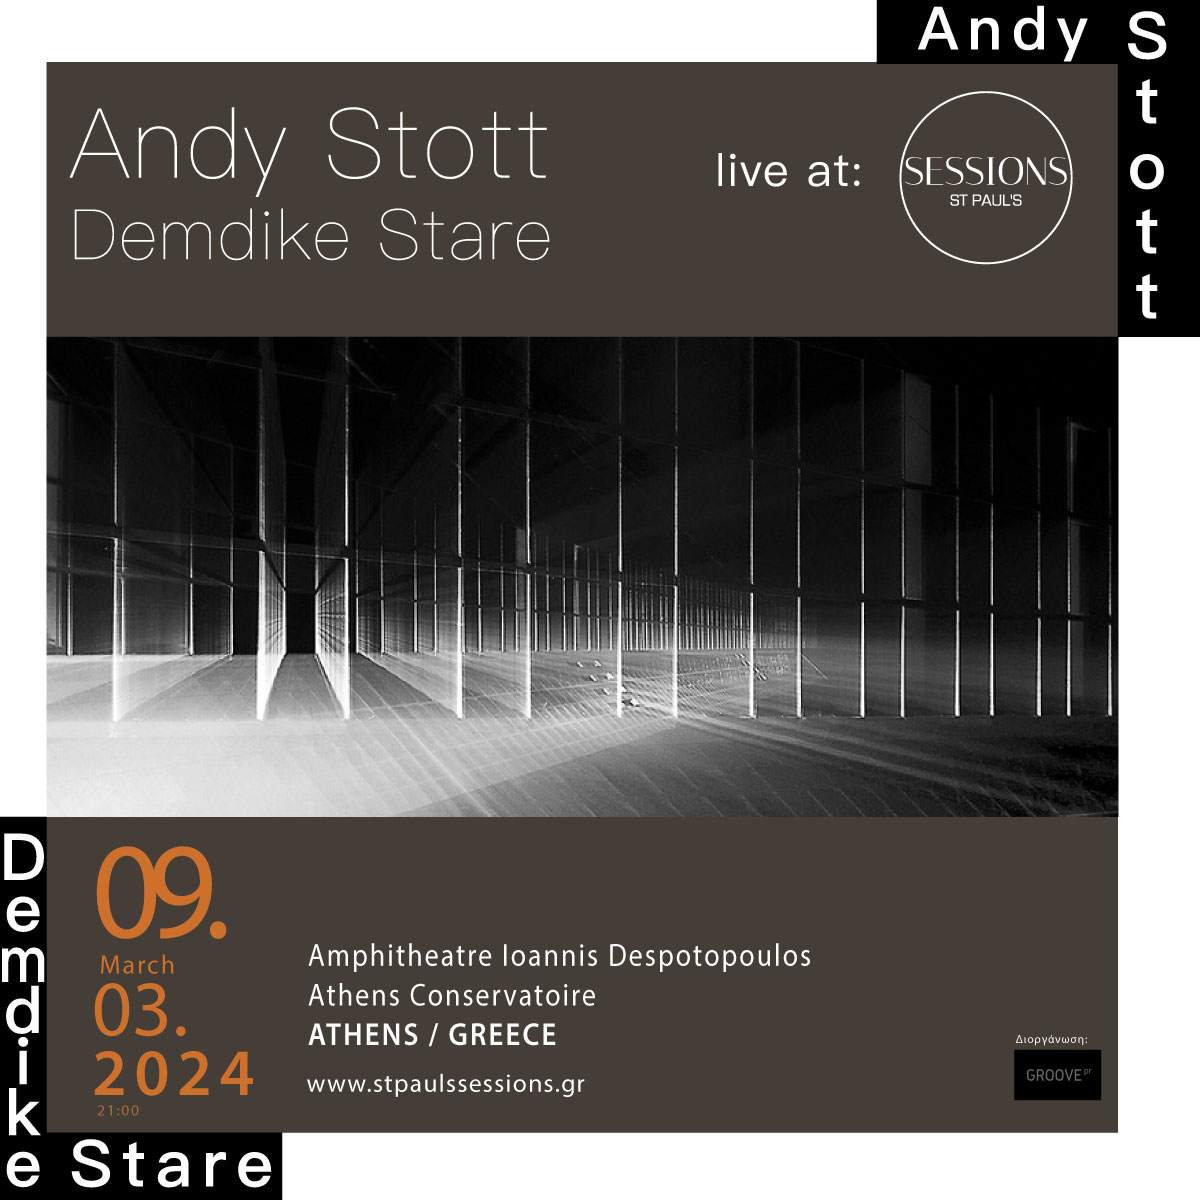 Andy Stott & Demdike Stare live at St Paul's Sessions 6 - フライヤー表